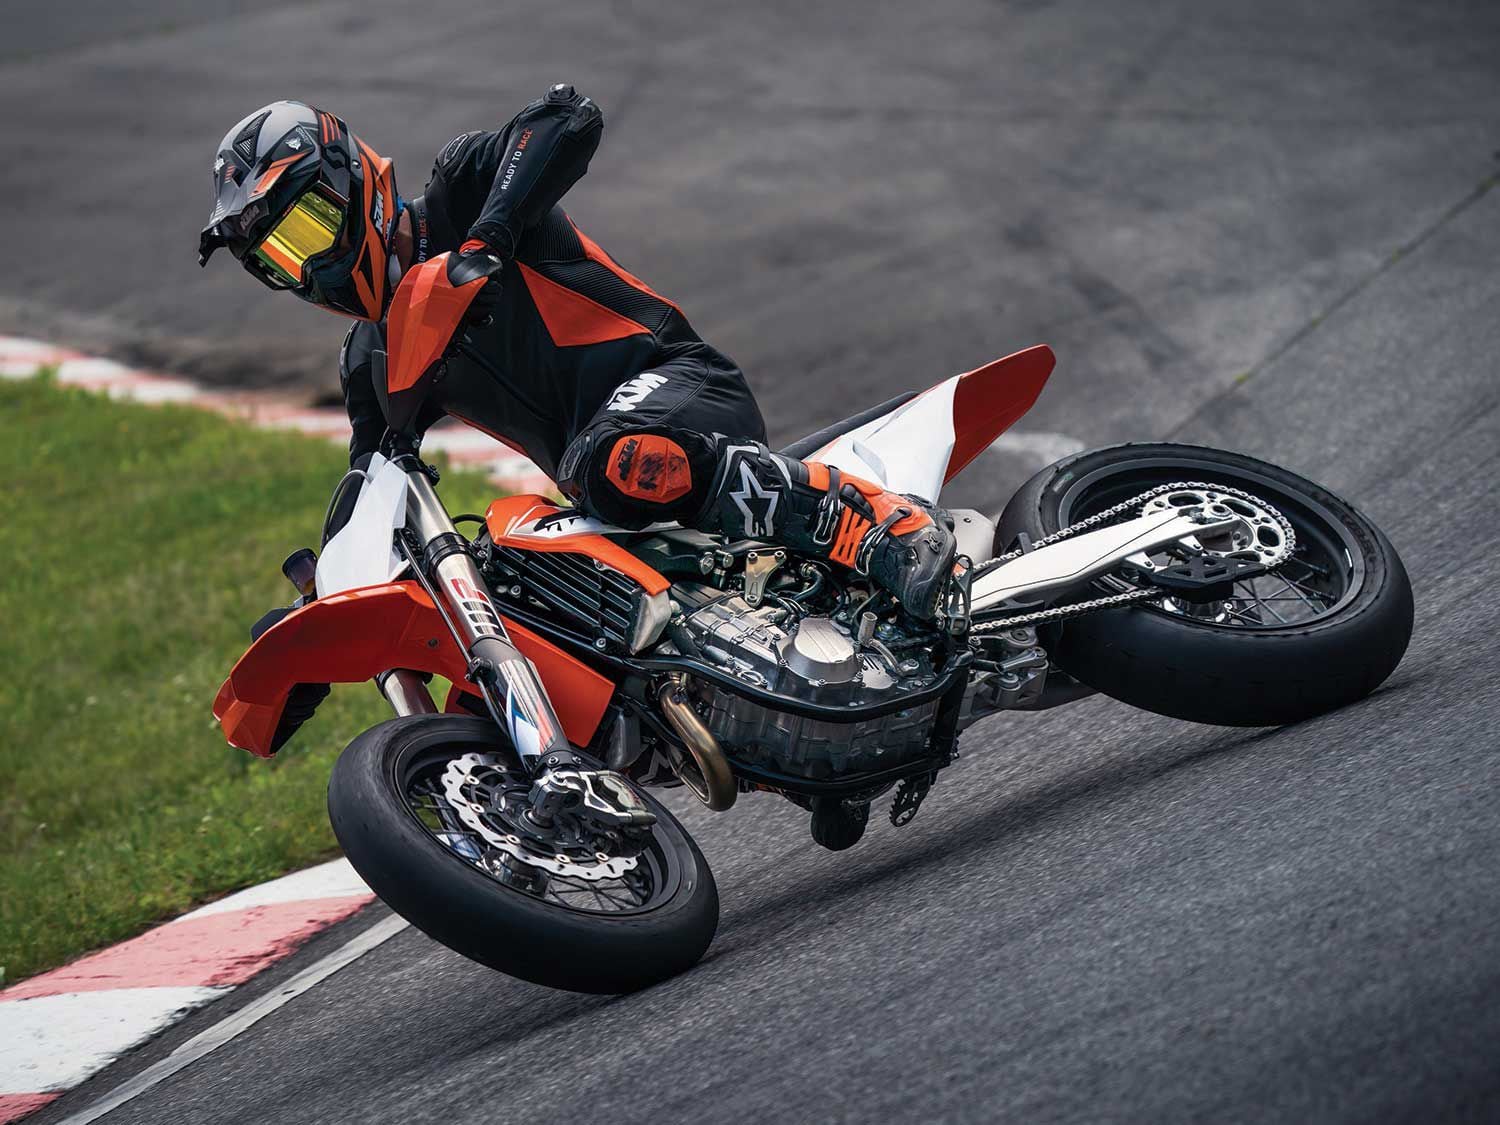 In typical KTM fashion, the 450 SMR inherits the 450 SX-F’s basic platform. A few key modifications were made for the rigors of supermoto competition.